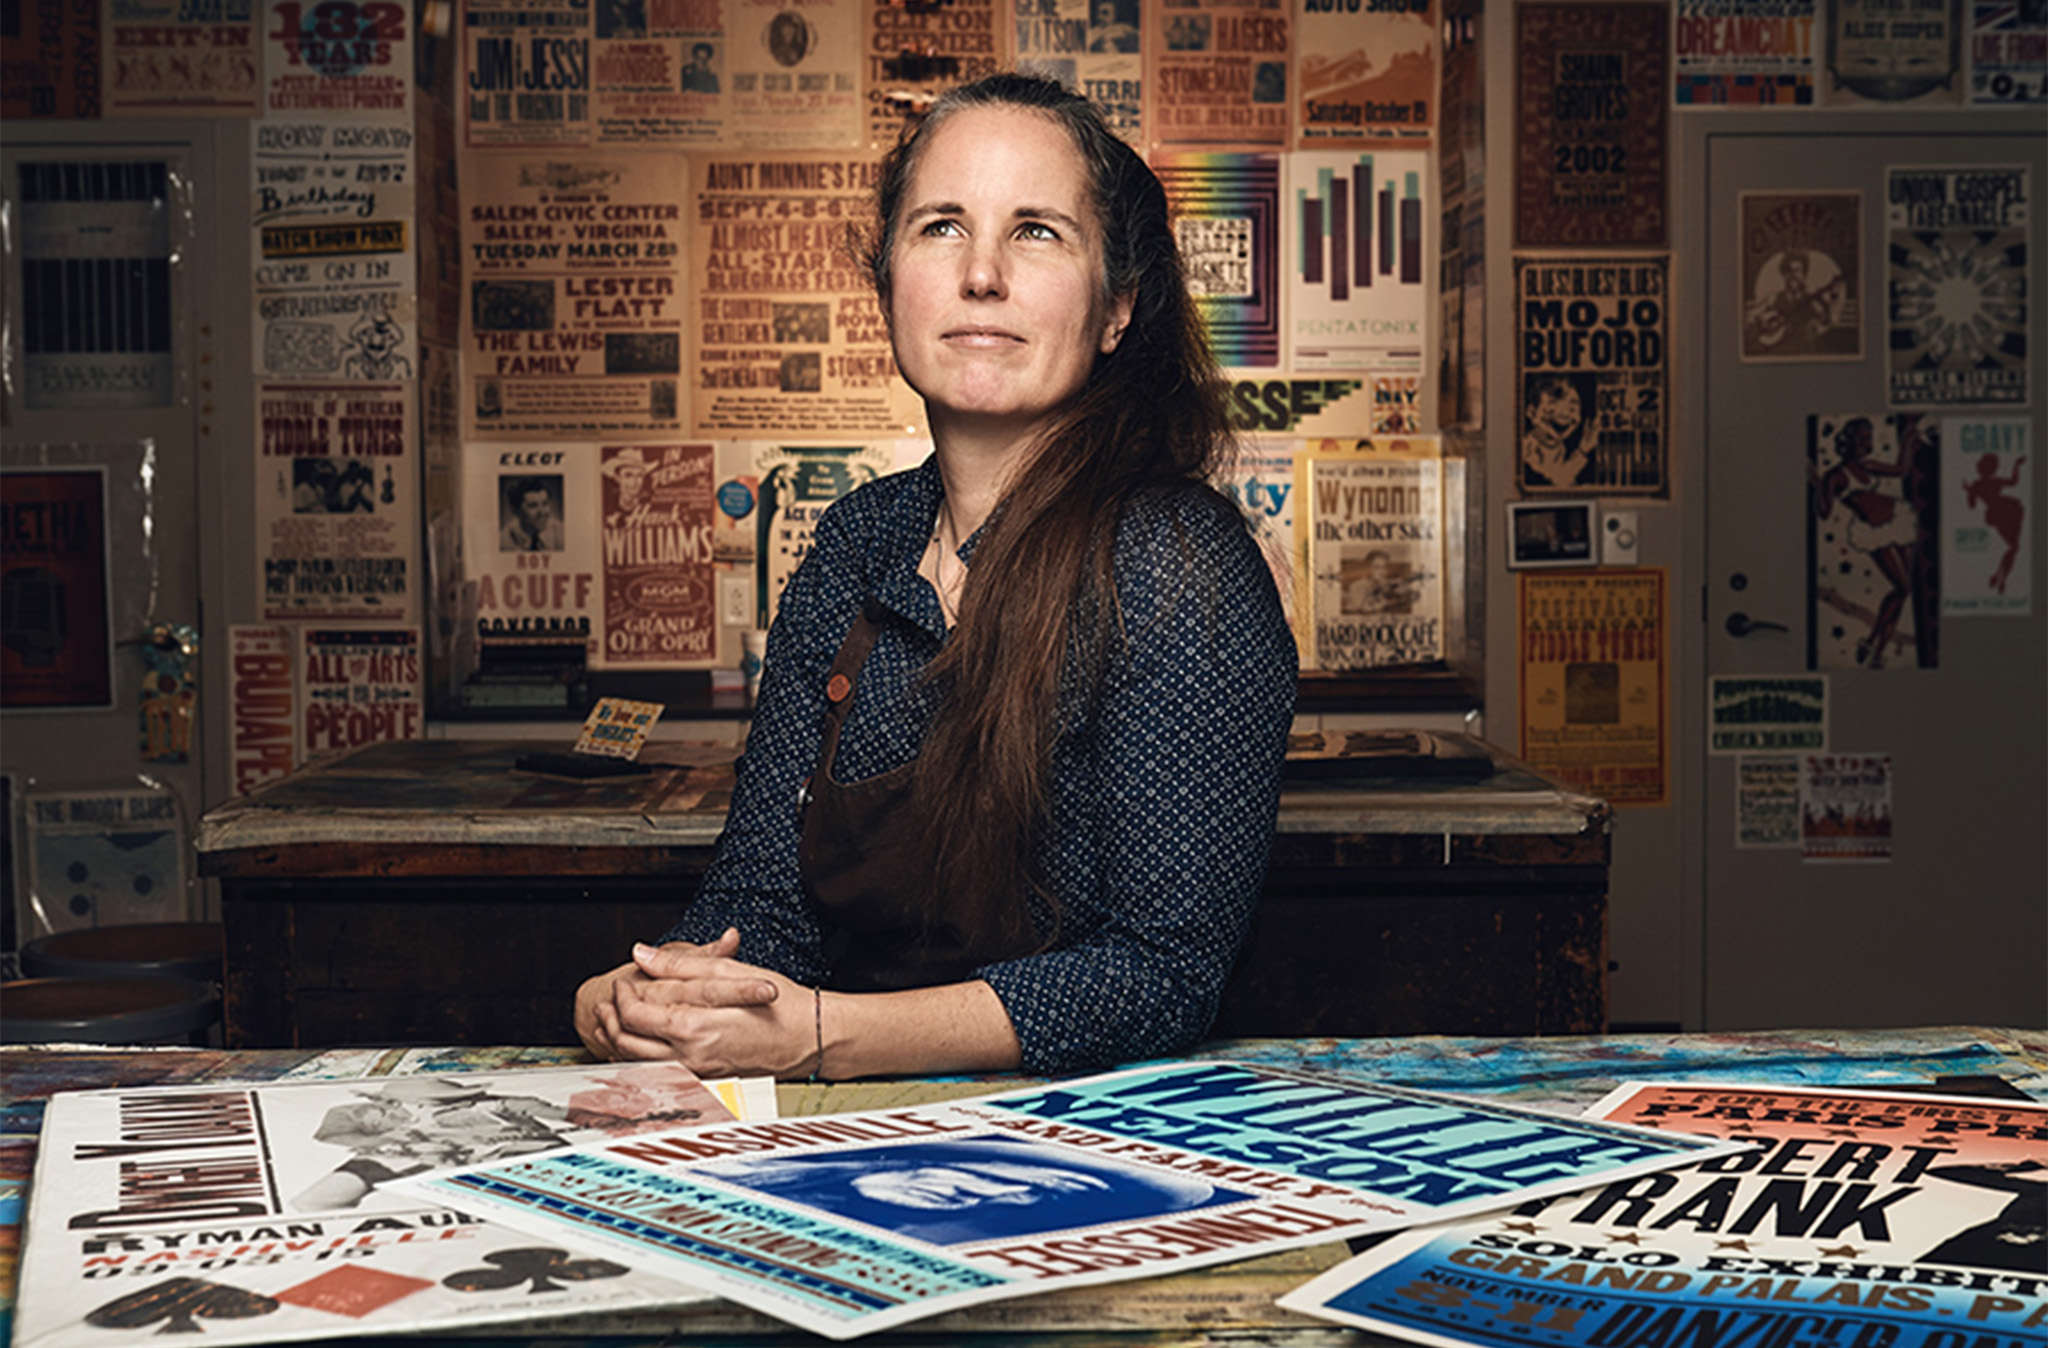 Explore the Legacy of Hatch Show Print with Celene Aubry April 9